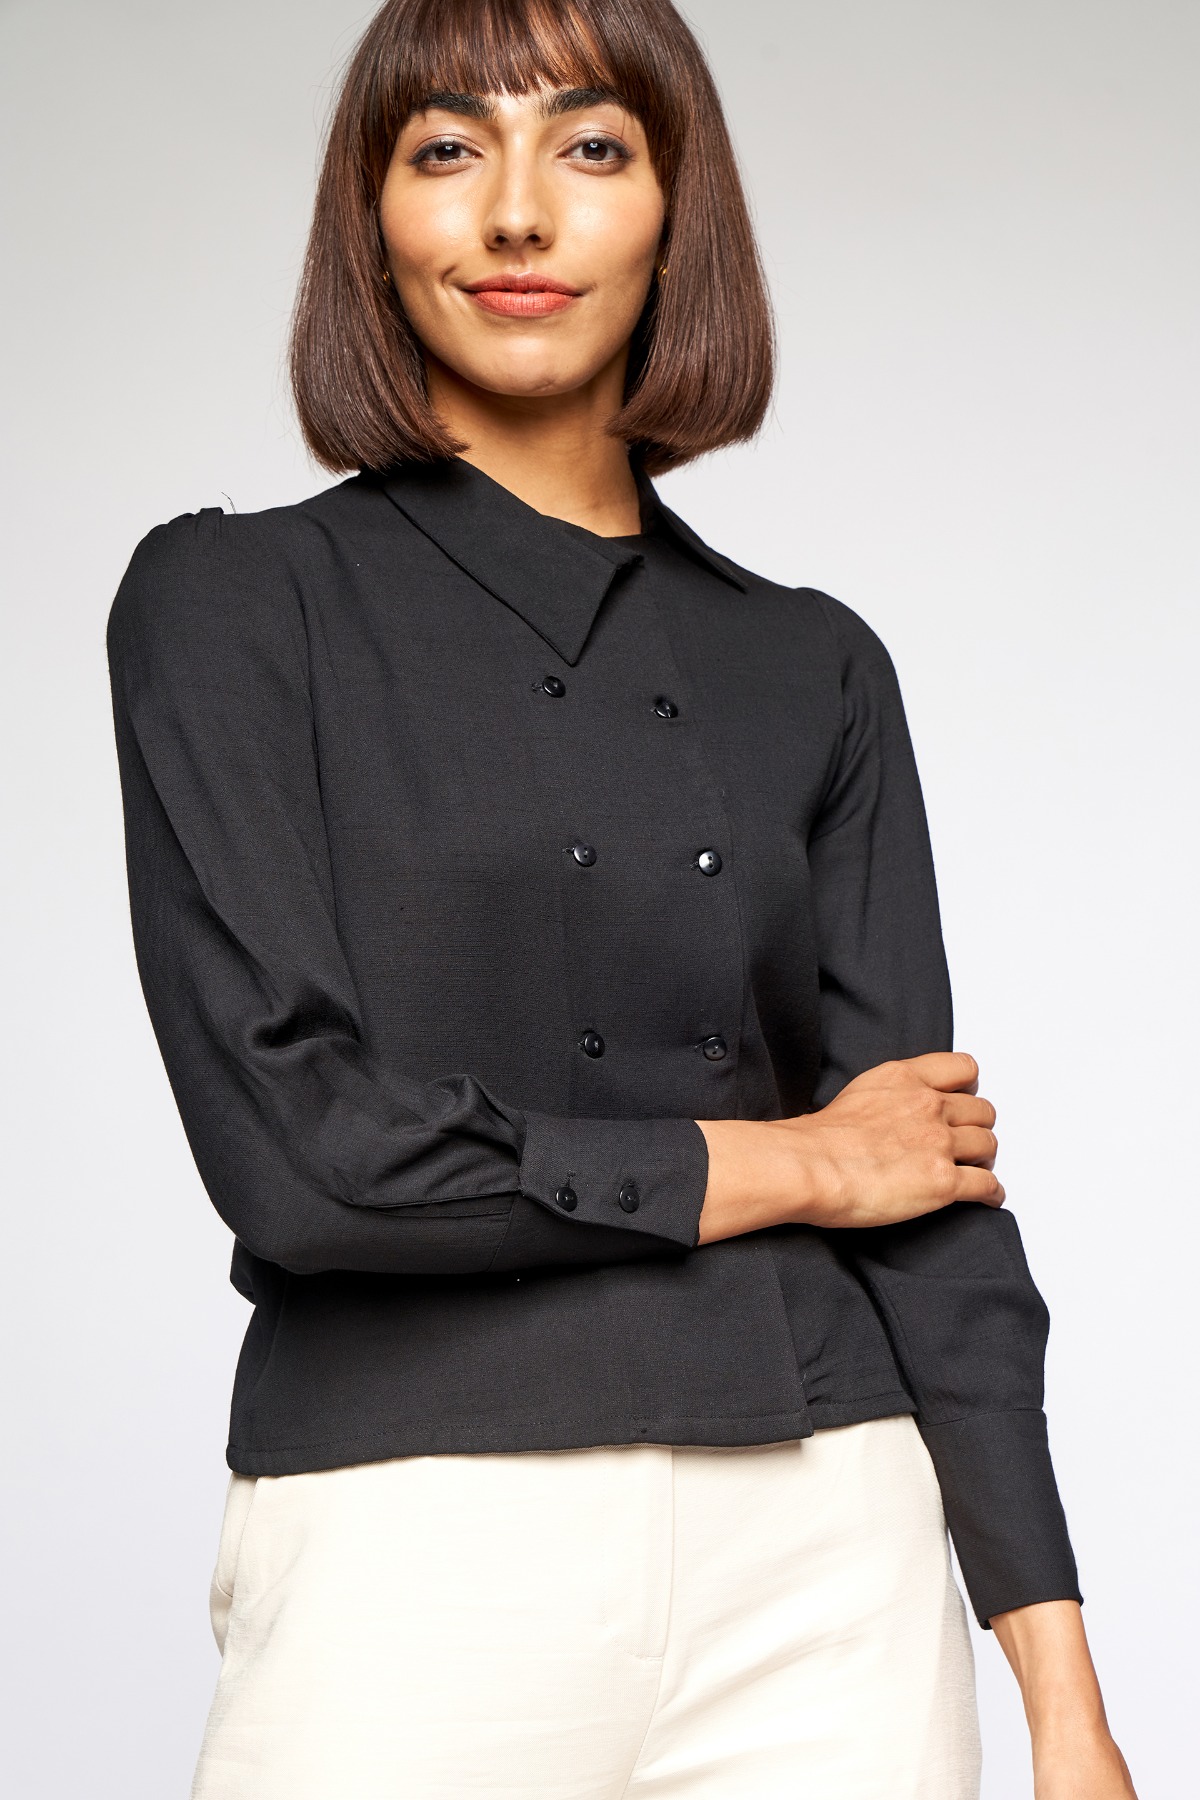 1 - Black Solid Shirt Style Top, image 1